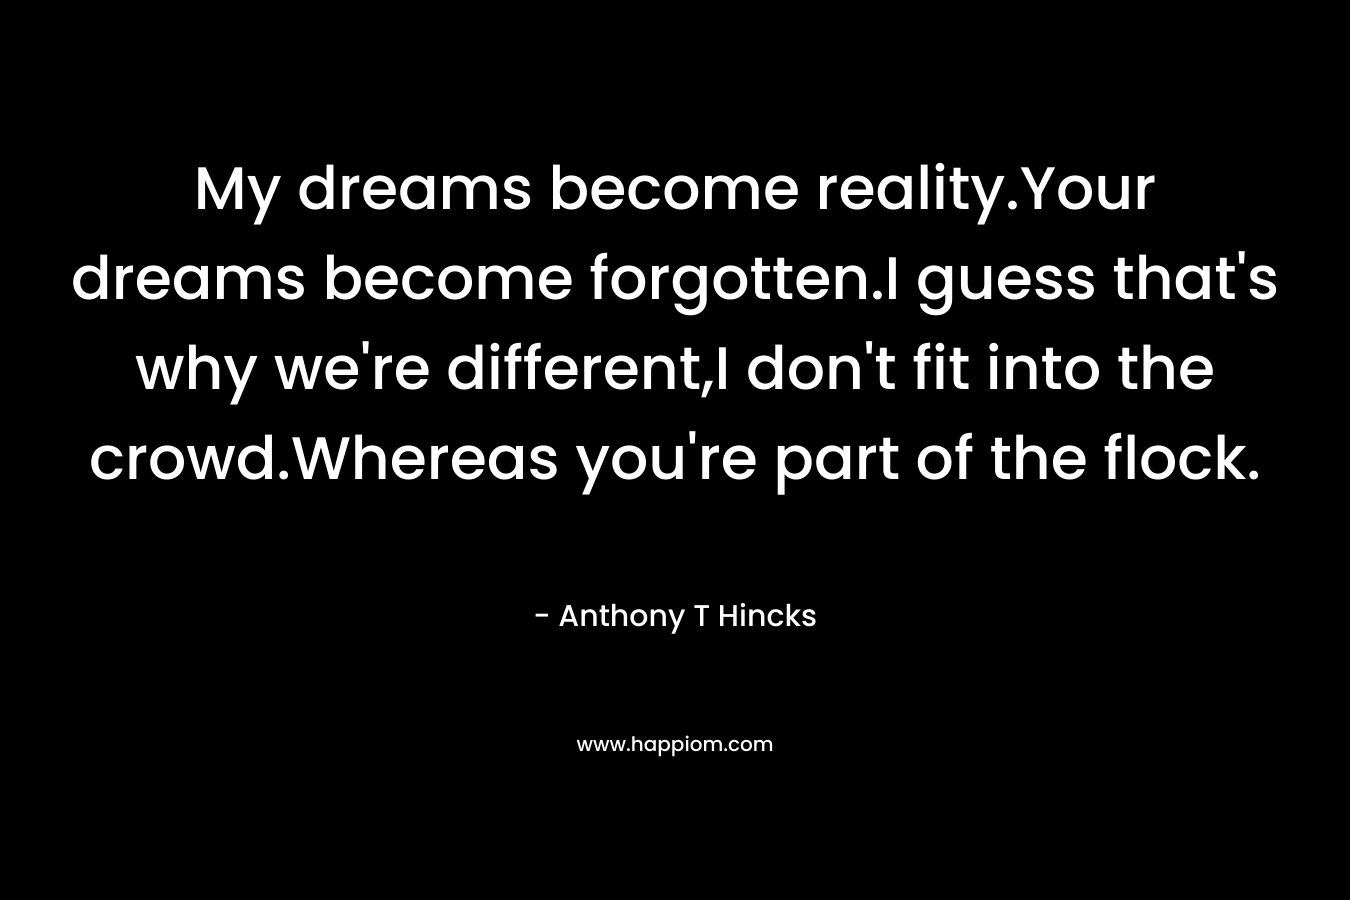 My dreams become reality.Your dreams become forgotten.I guess that’s why we’re different,I don’t fit into the crowd.Whereas you’re part of the flock. – Anthony T Hincks